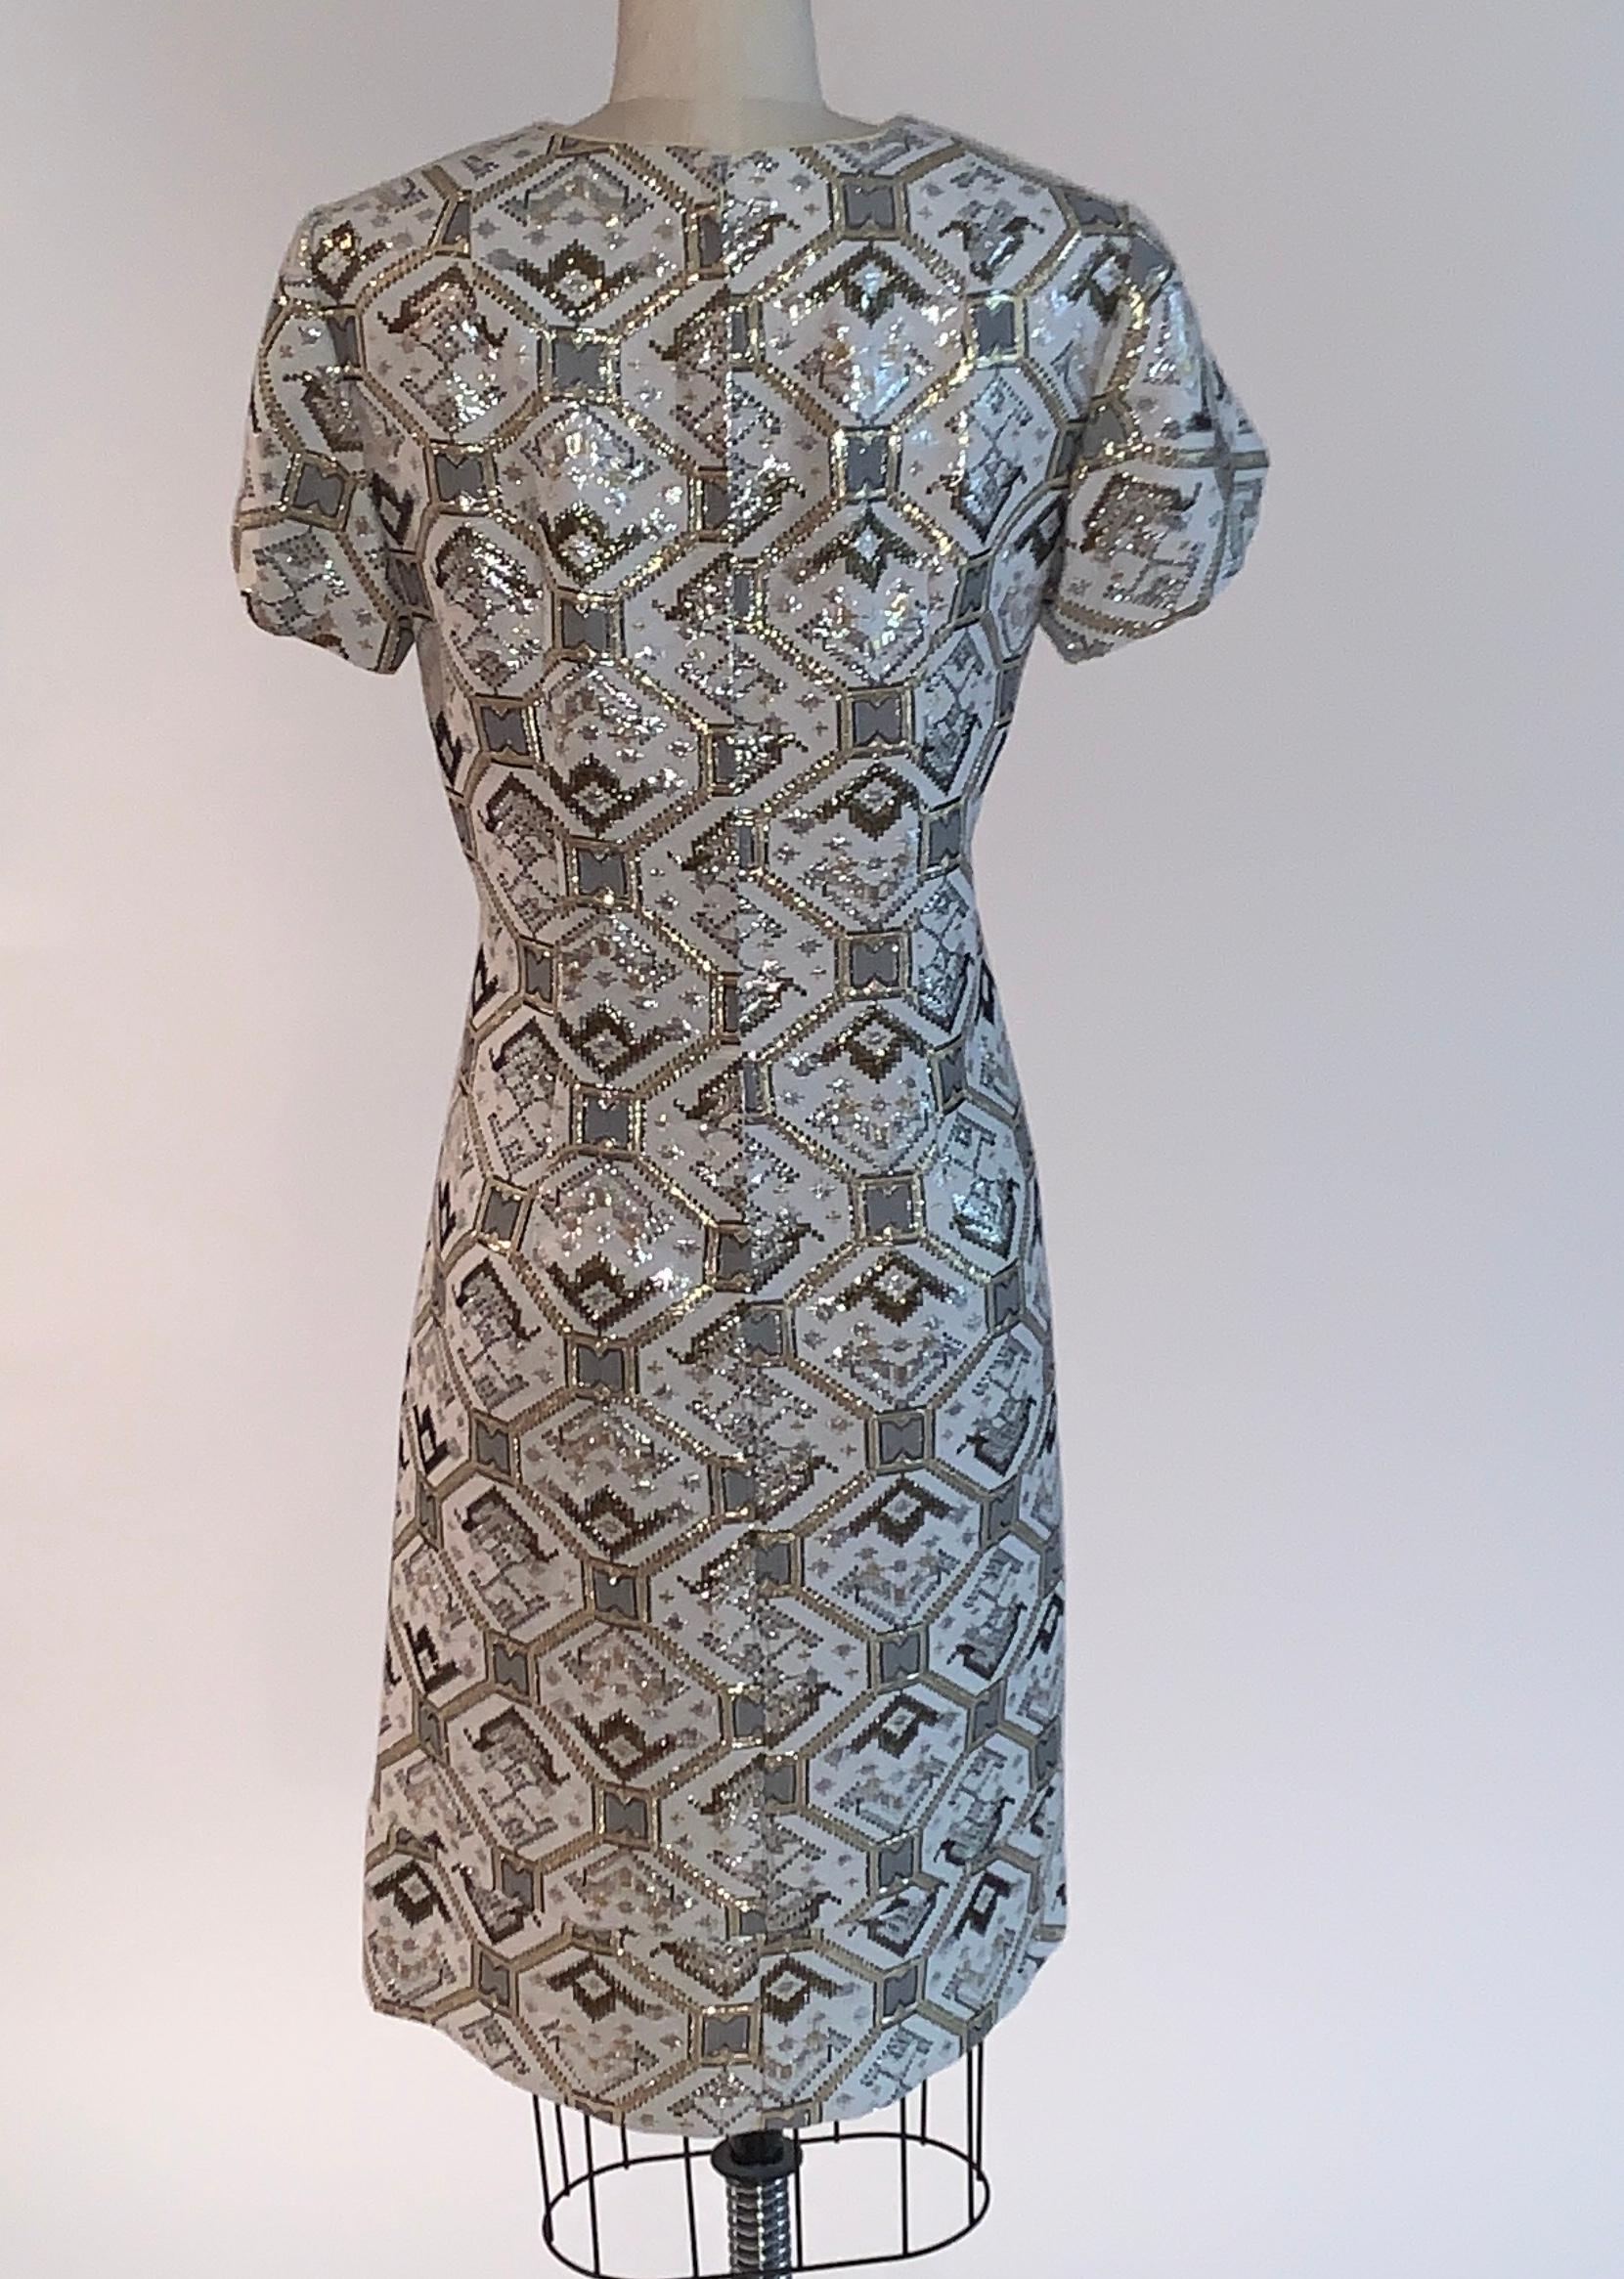 Vintage 1970s Metallic Silver Gold and White Brocade Coat and Dress Set  In Excellent Condition For Sale In San Francisco, CA